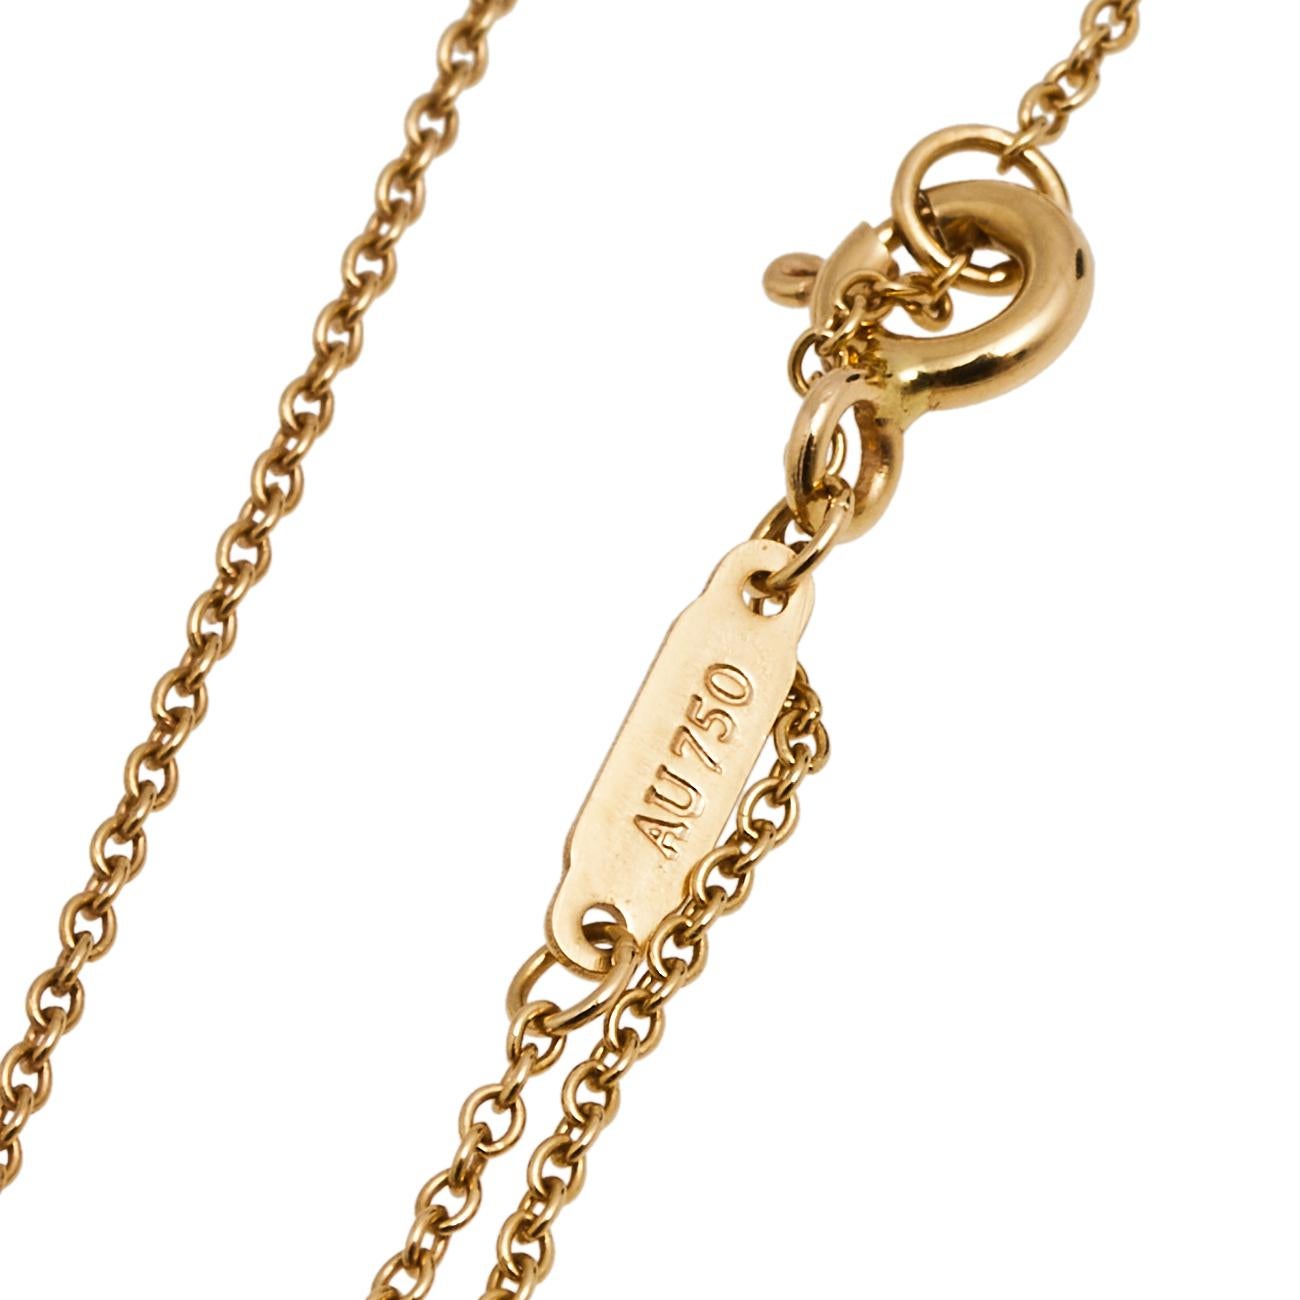 This beauty from Tiffany & Co. is exquisite and perfectly designed to last! Beautifully crafted from 18k rose gold, this piece is a stunner. It has been gloriously styled with an infinity pendant that is carried by a chain. The necklace fastens with